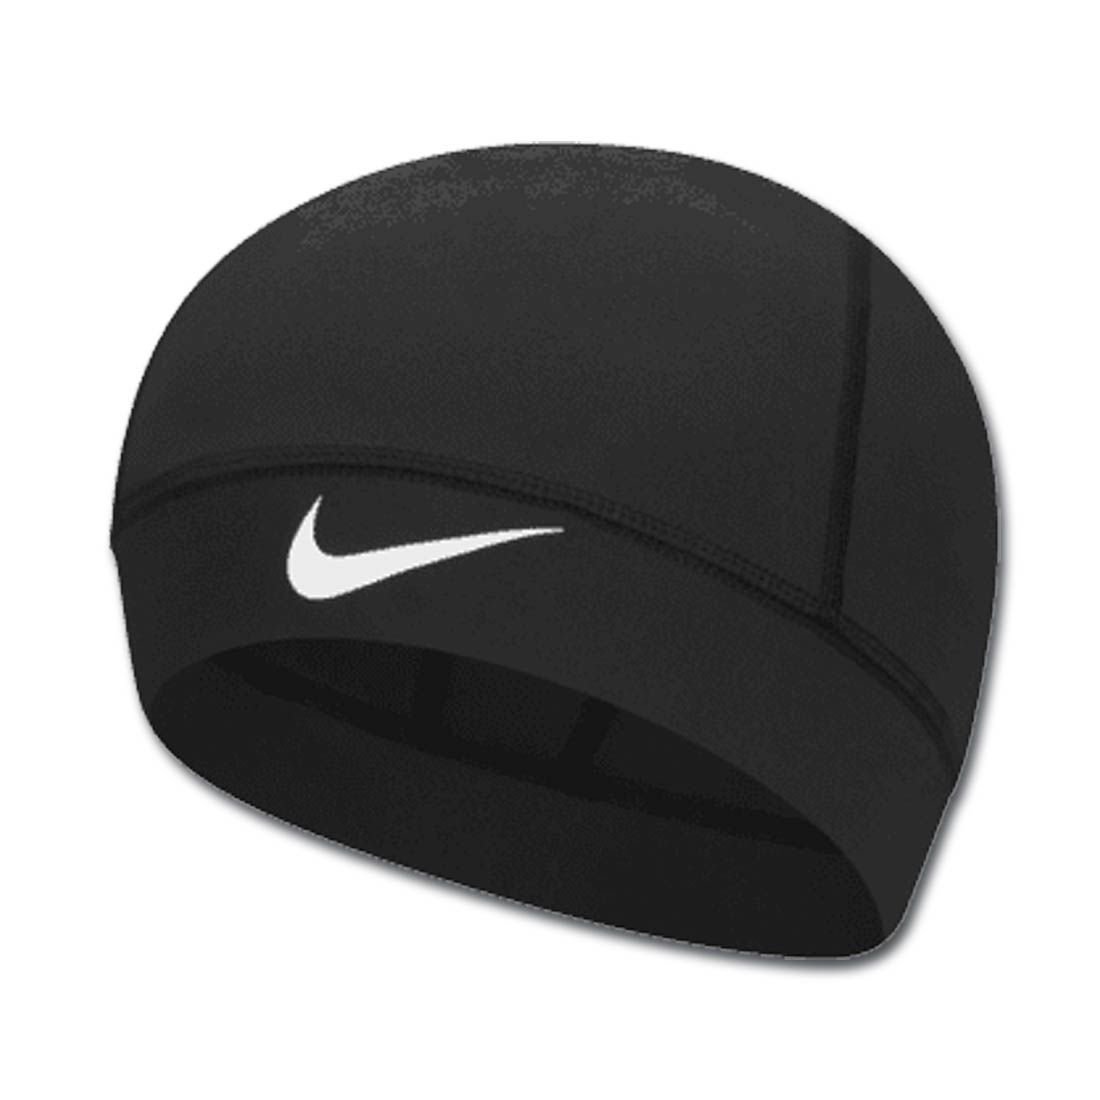 United States Nike Pro Skull Cap 3.0 Discount Online At nafootballover.com